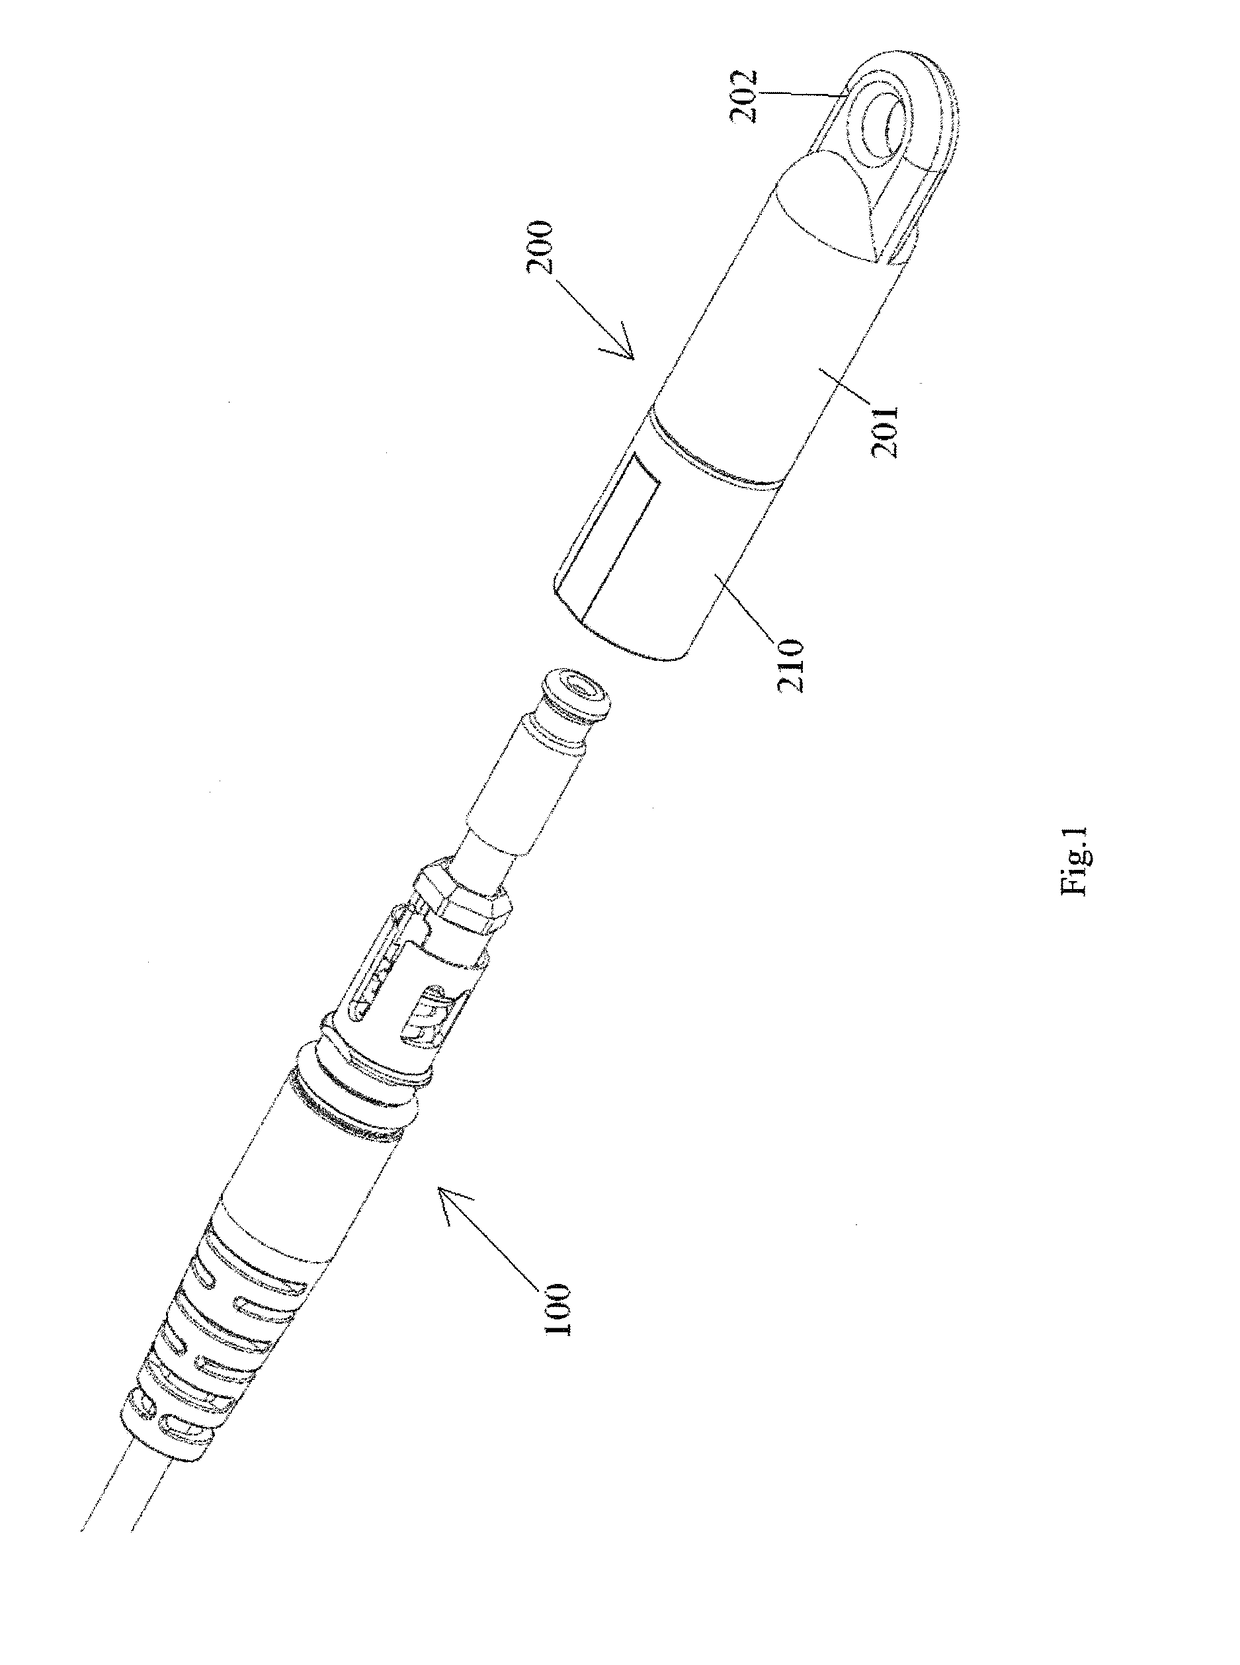 Cable pulling assembly having a cable connector and a pulling device